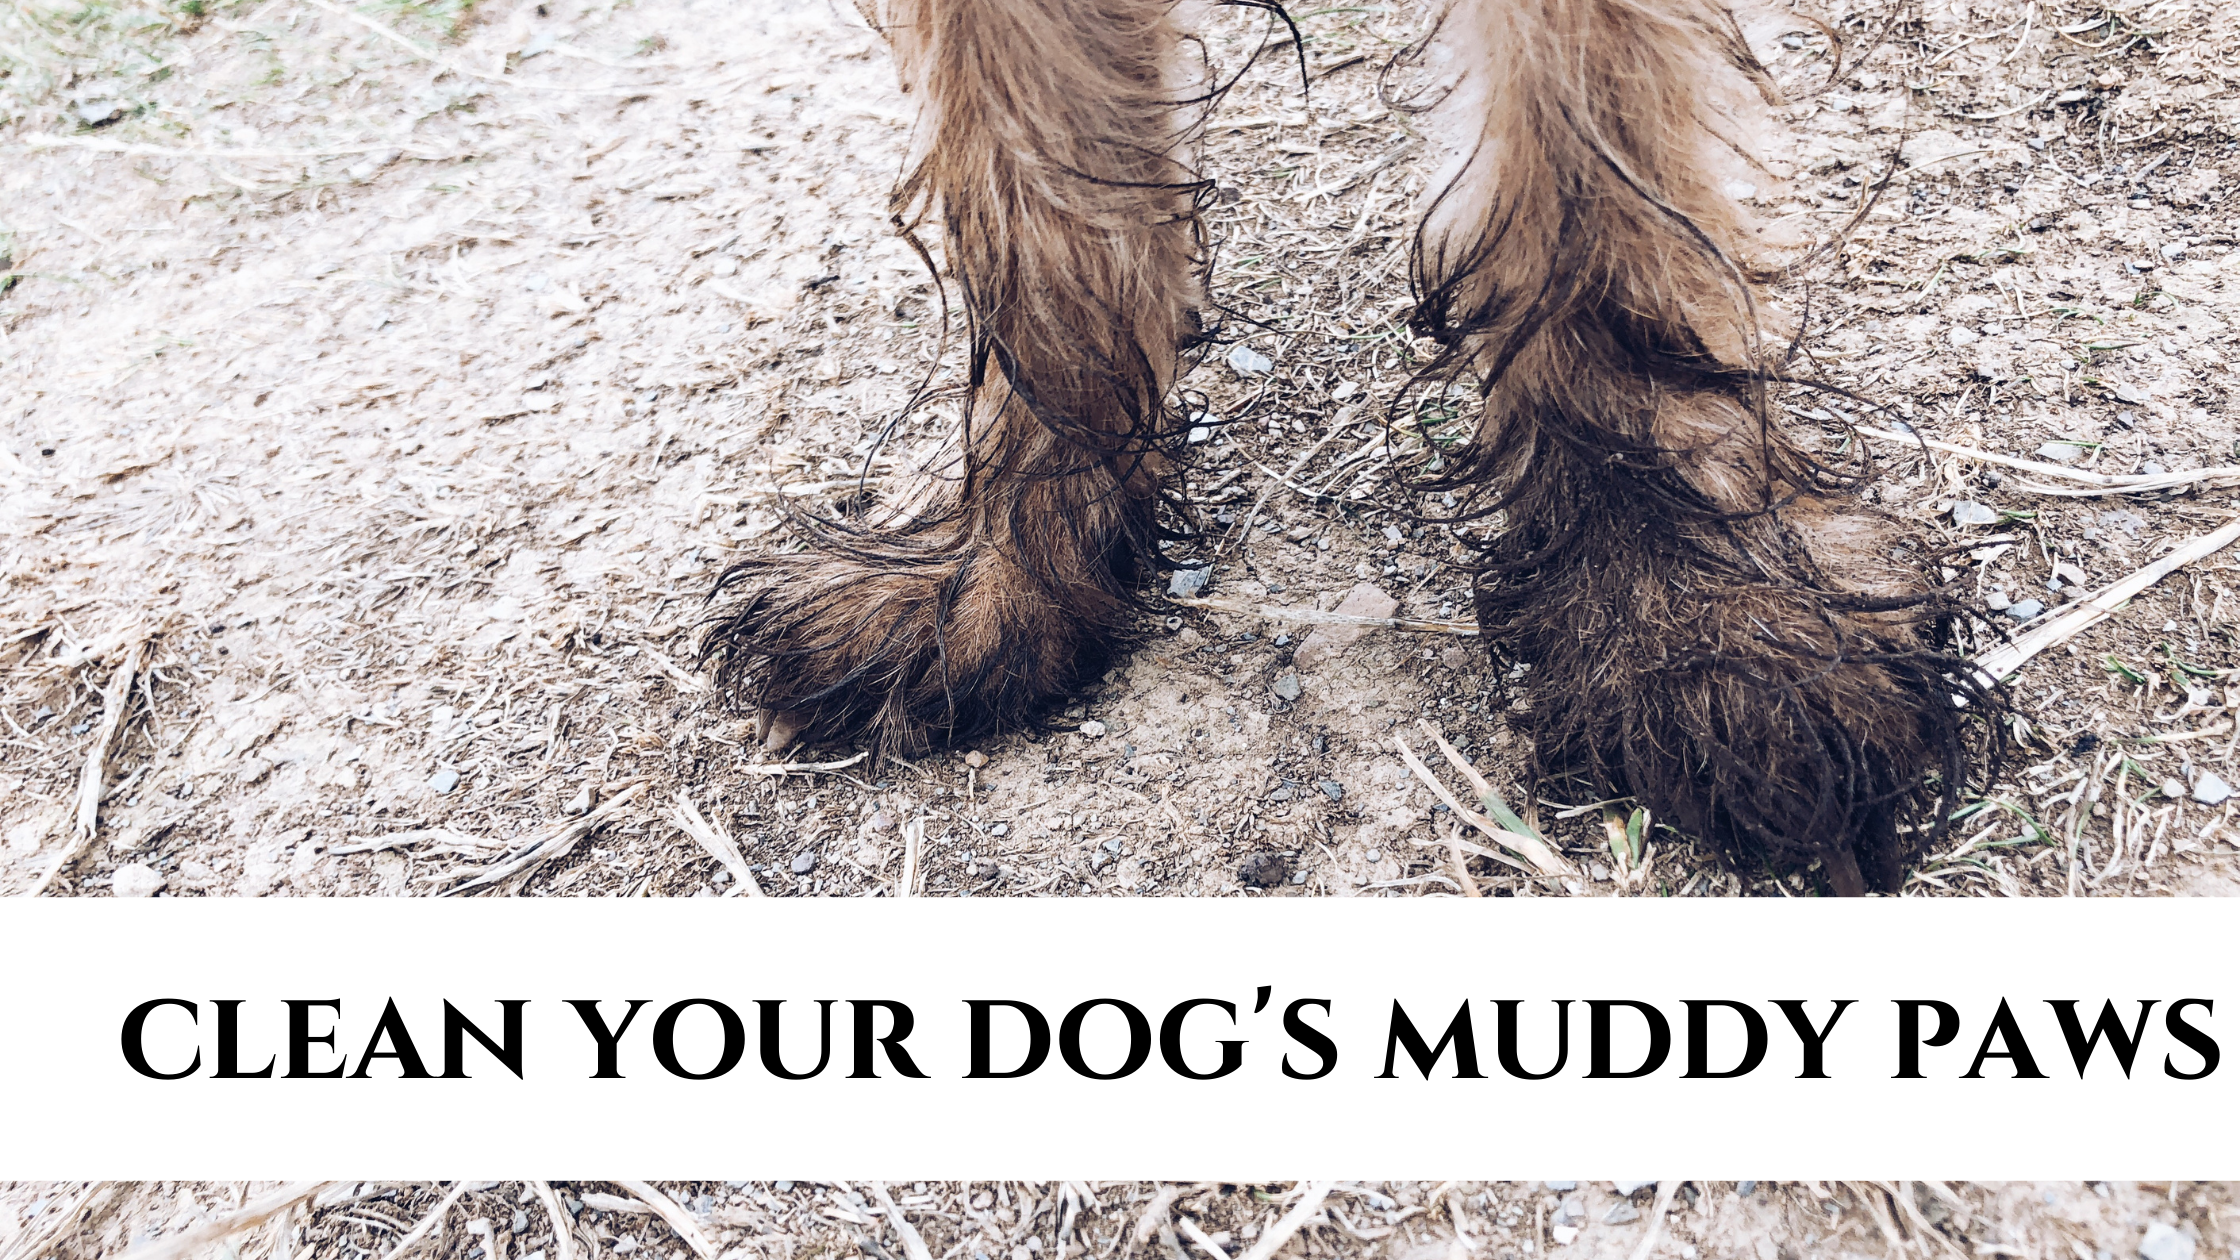 https://eadn-wc05-628274.nxedge.io/cdn/wp-content/uploads/2021/03/clean_your_dogs_muddy-paws_cover.png